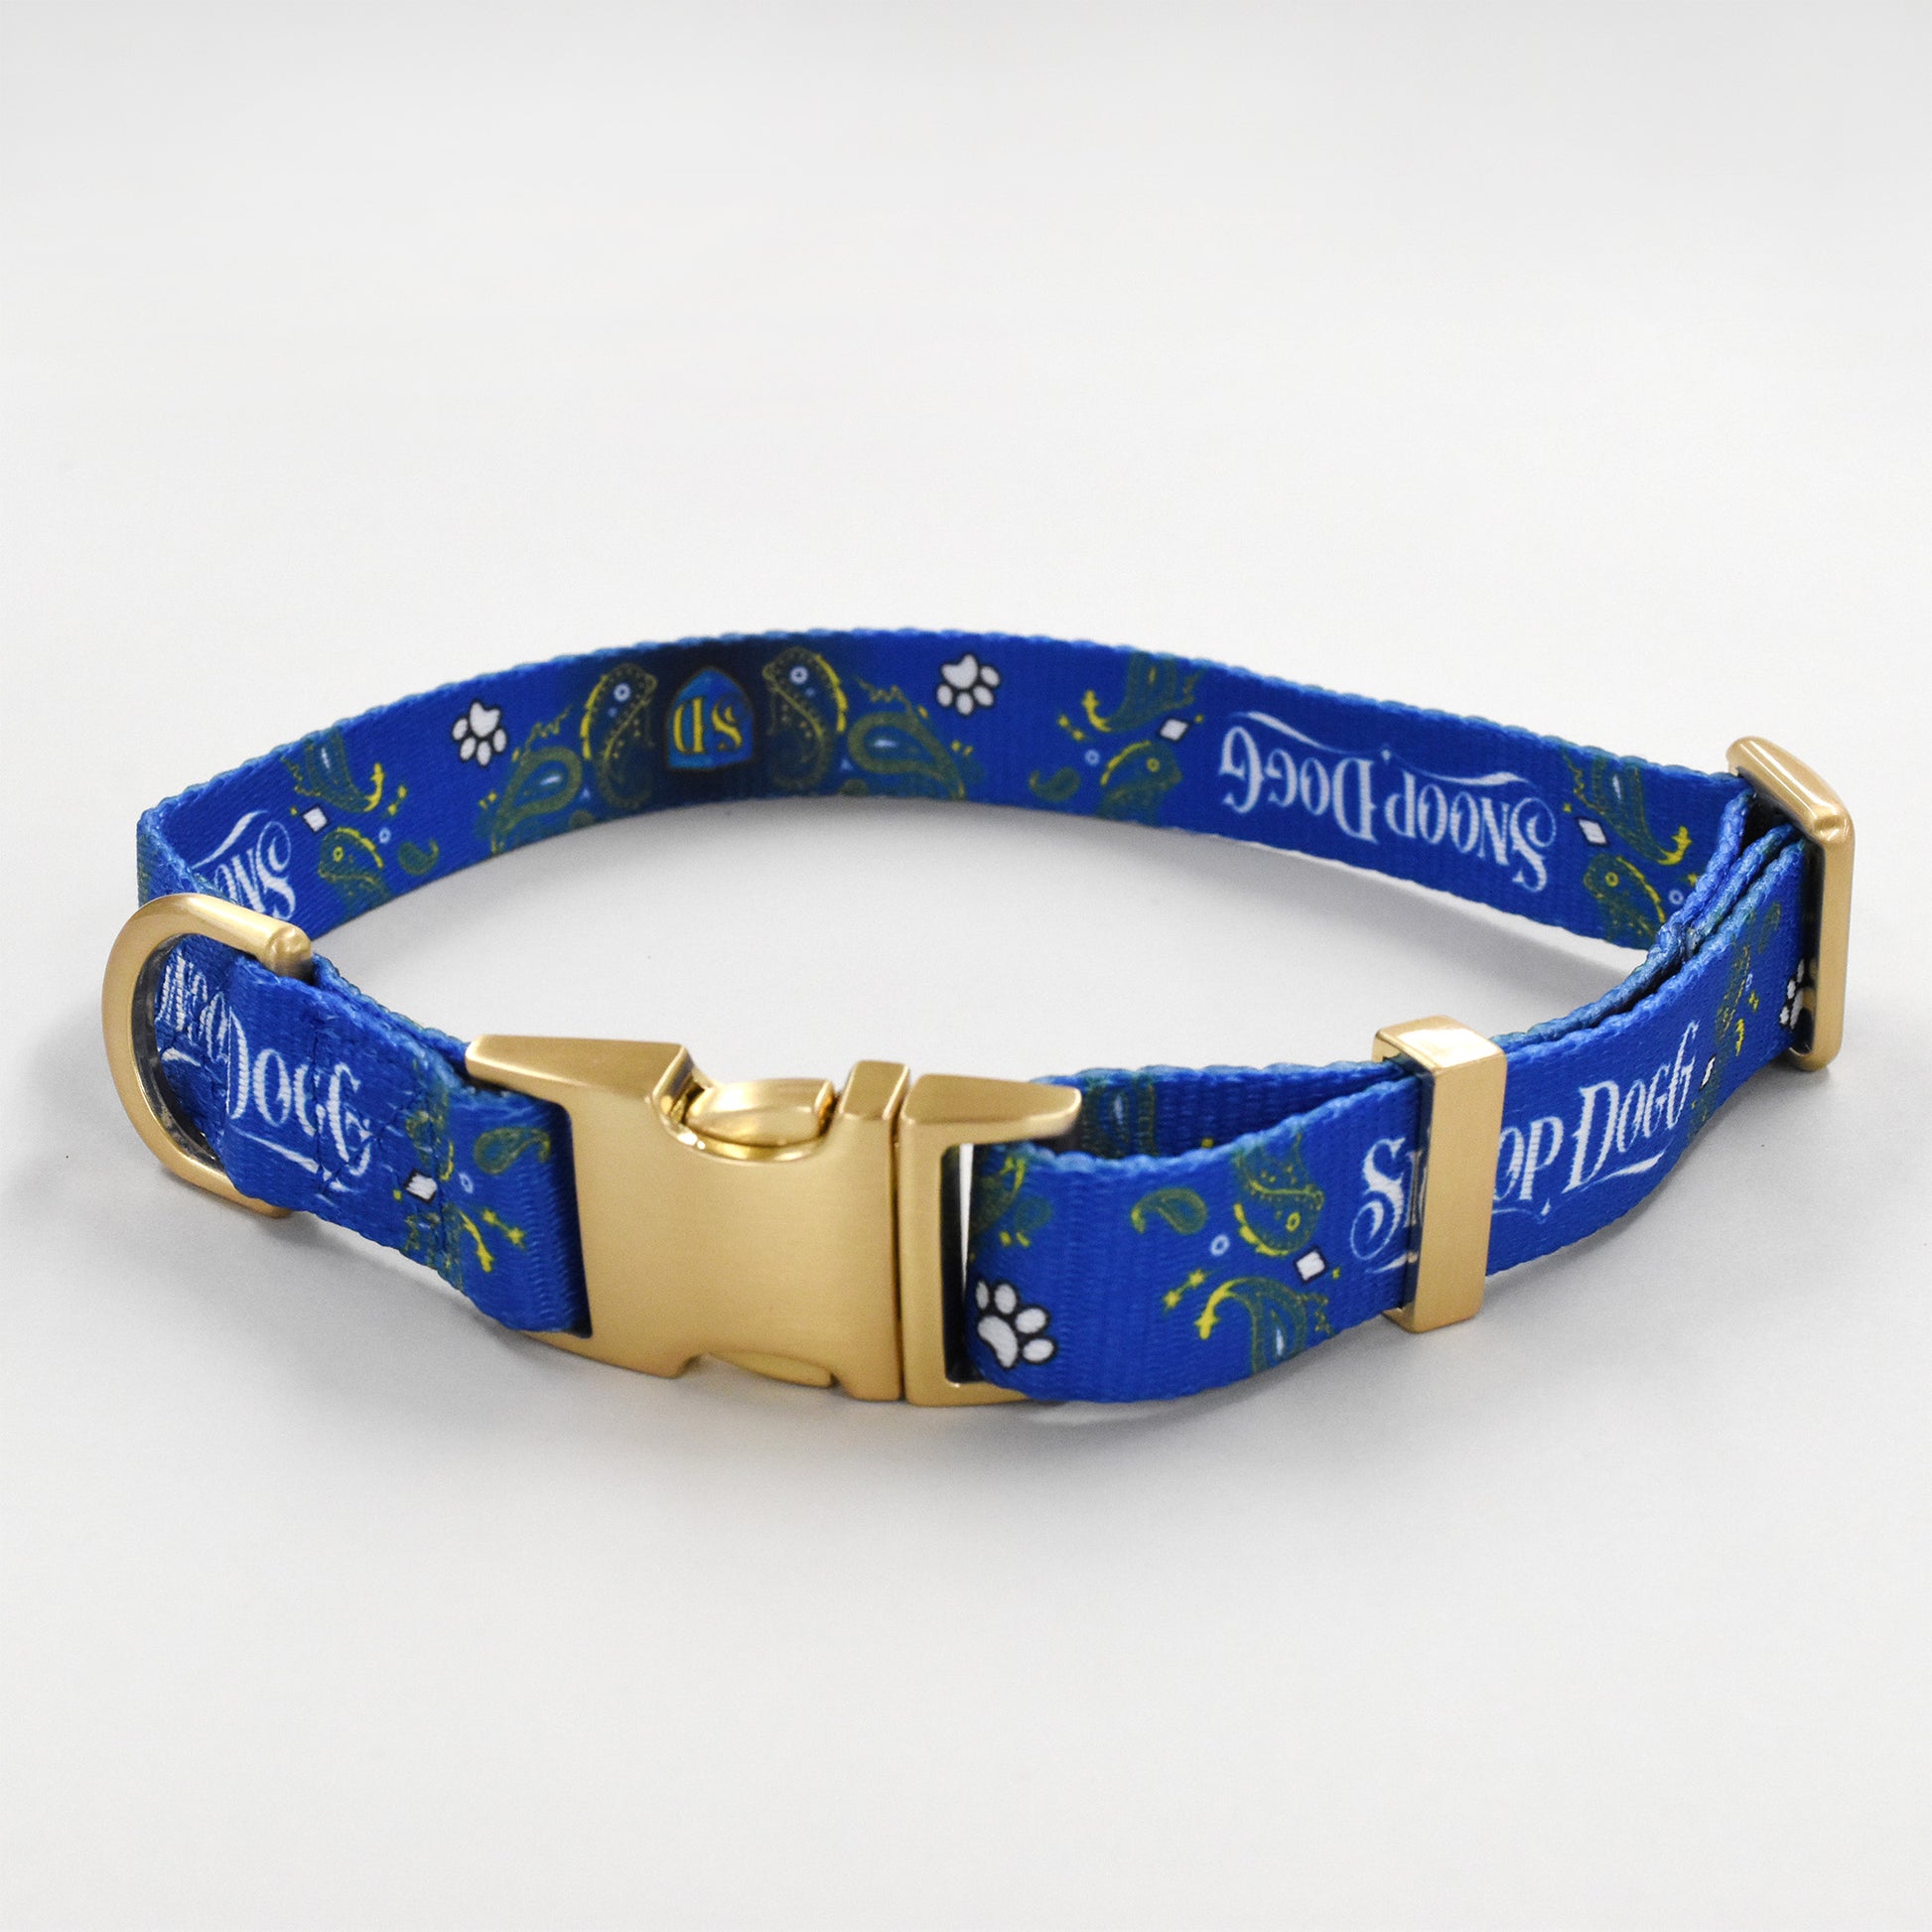 Product flat lay of the Halftime Deluxe Pet Collar.